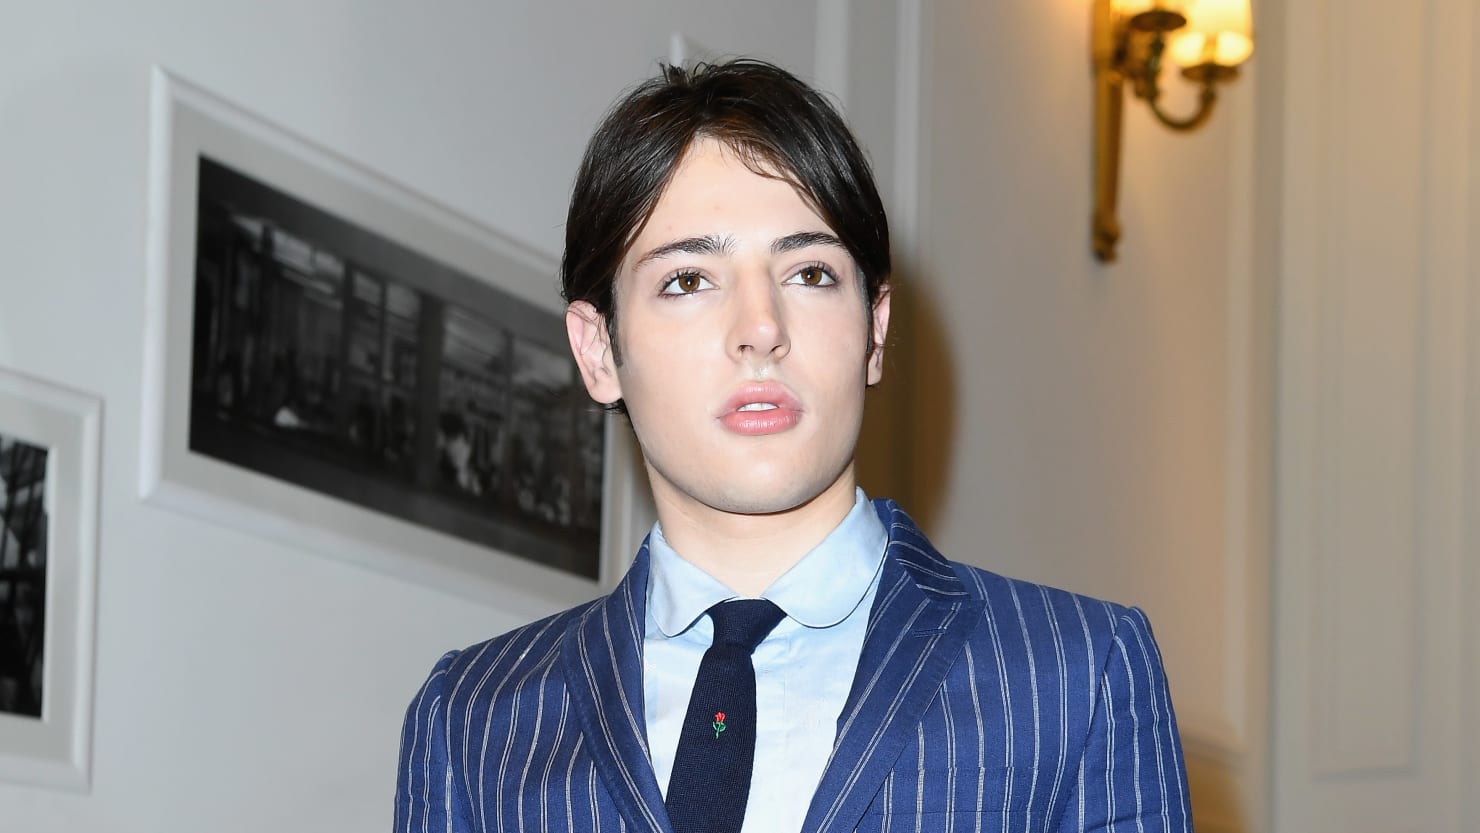 Harry Brant, once the ‘most beautiful teenager in New York’, killed at 24